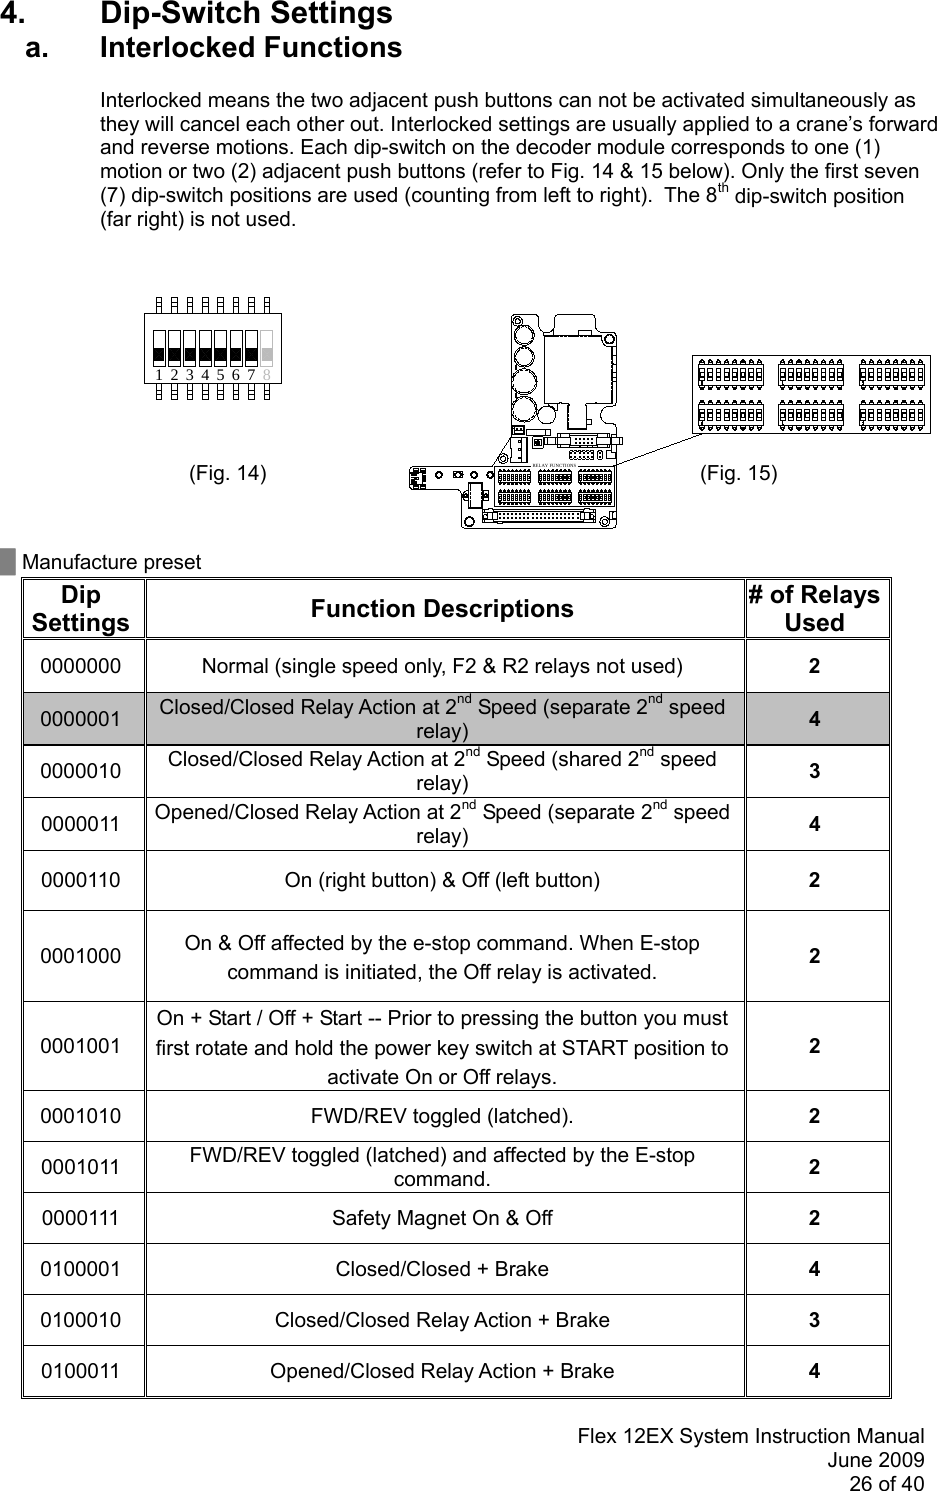 Flex 12EX System Instruction ManualJune 200926 of 40RELAY FUNCTIONS1 324 756 84. Dip-Switch Settingsa. Interlocked FunctionsInterlocked means the two adjacent push buttons can not be activated simultaneously asthey will cancel each other out. Interlocked settings are usually applied to a crane’s forwardand reverse motions. Each dip-switch on the decoder module corresponds to one (1)motion or two (2) adjacent push buttons (refer to Fig. 14 &amp; 15 below). Only the first seven(7) dip-switch positions are used (counting from left to right).  The 8th dip-switch position(far right) is not used.  (Fig. 14) (Fig. 15)▇ Manufacture presetDipSettings Function Descriptions # of RelaysUsed0000000 Normal (single speed only, F2 &amp; R2 relays not used) 20000001 Closed/Closed Relay Action at 2nd Speed (separate 2nd speedrelay) 40000010 Closed/Closed Relay Action at 2nd Speed (shared 2nd speedrelay) 30000011 Opened/Closed Relay Action at 2nd Speed (separate 2nd speedrelay) 40000110 On (right button) &amp; Off (left button) 20001000 On &amp; Off affected by the e-stop command. When E-stopcommand is initiated, the Off relay is activated. 20001001On + Start / Off + Start -- Prior to pressing the button you mustfirst rotate and hold the power key switch at START position toactivate On or Off relays.20001010 FWD/REV toggled (latched). 20001011 FWD/REV toggled (latched) and affected by the E-stopcommand. 20000111 Safety Magnet On &amp; Off 20100001 Closed/Closed + Brake 40100010 Closed/Closed Relay Action + Brake 30100011 Opened/Closed Relay Action + Brake 4